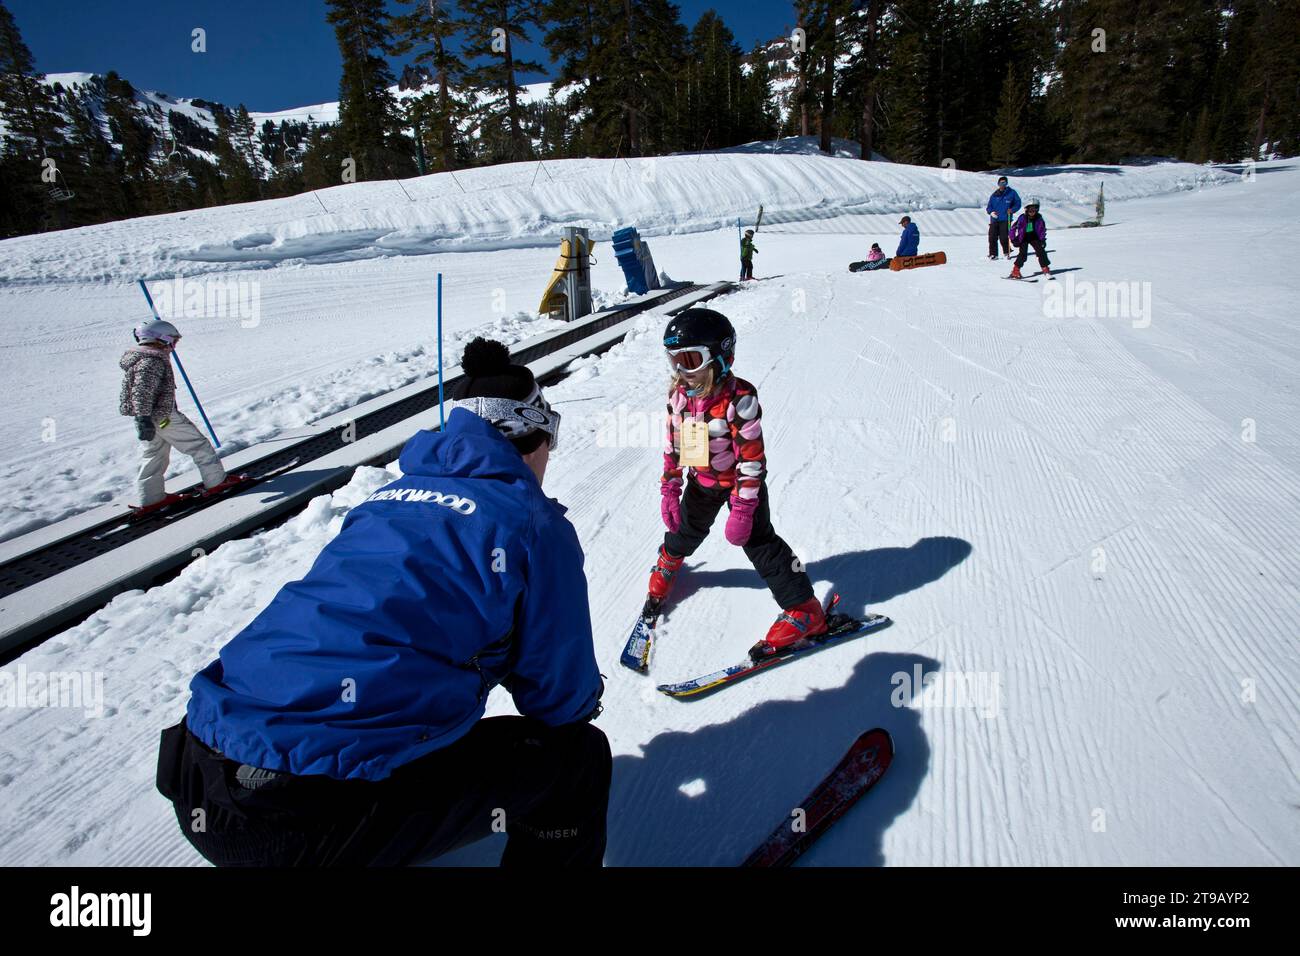 Ski Instructor helping a young skier on a bunny slope. Stock Photo